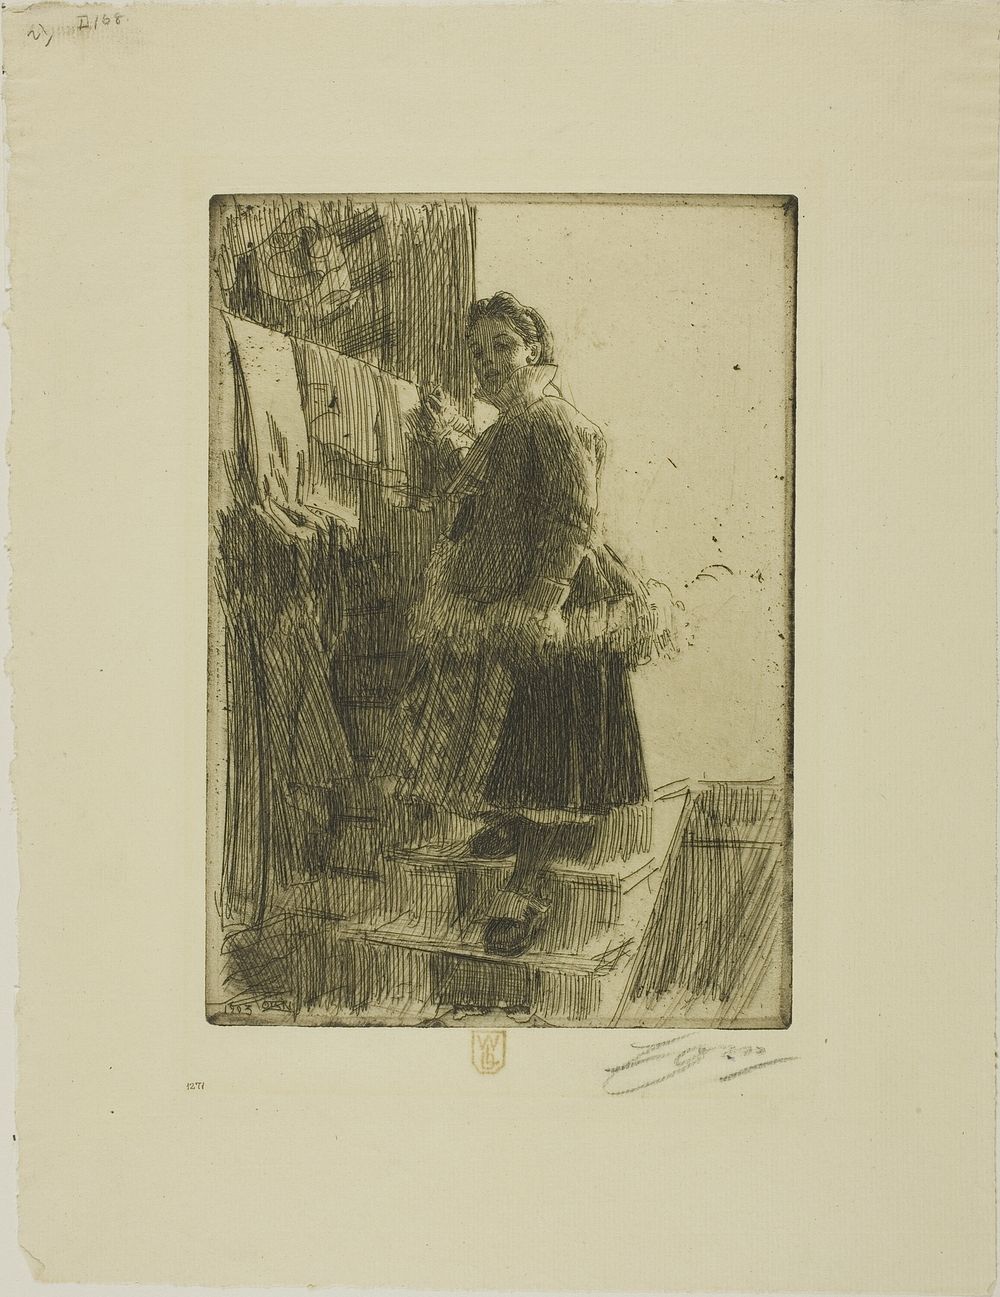 The Storehouse by Anders Zorn